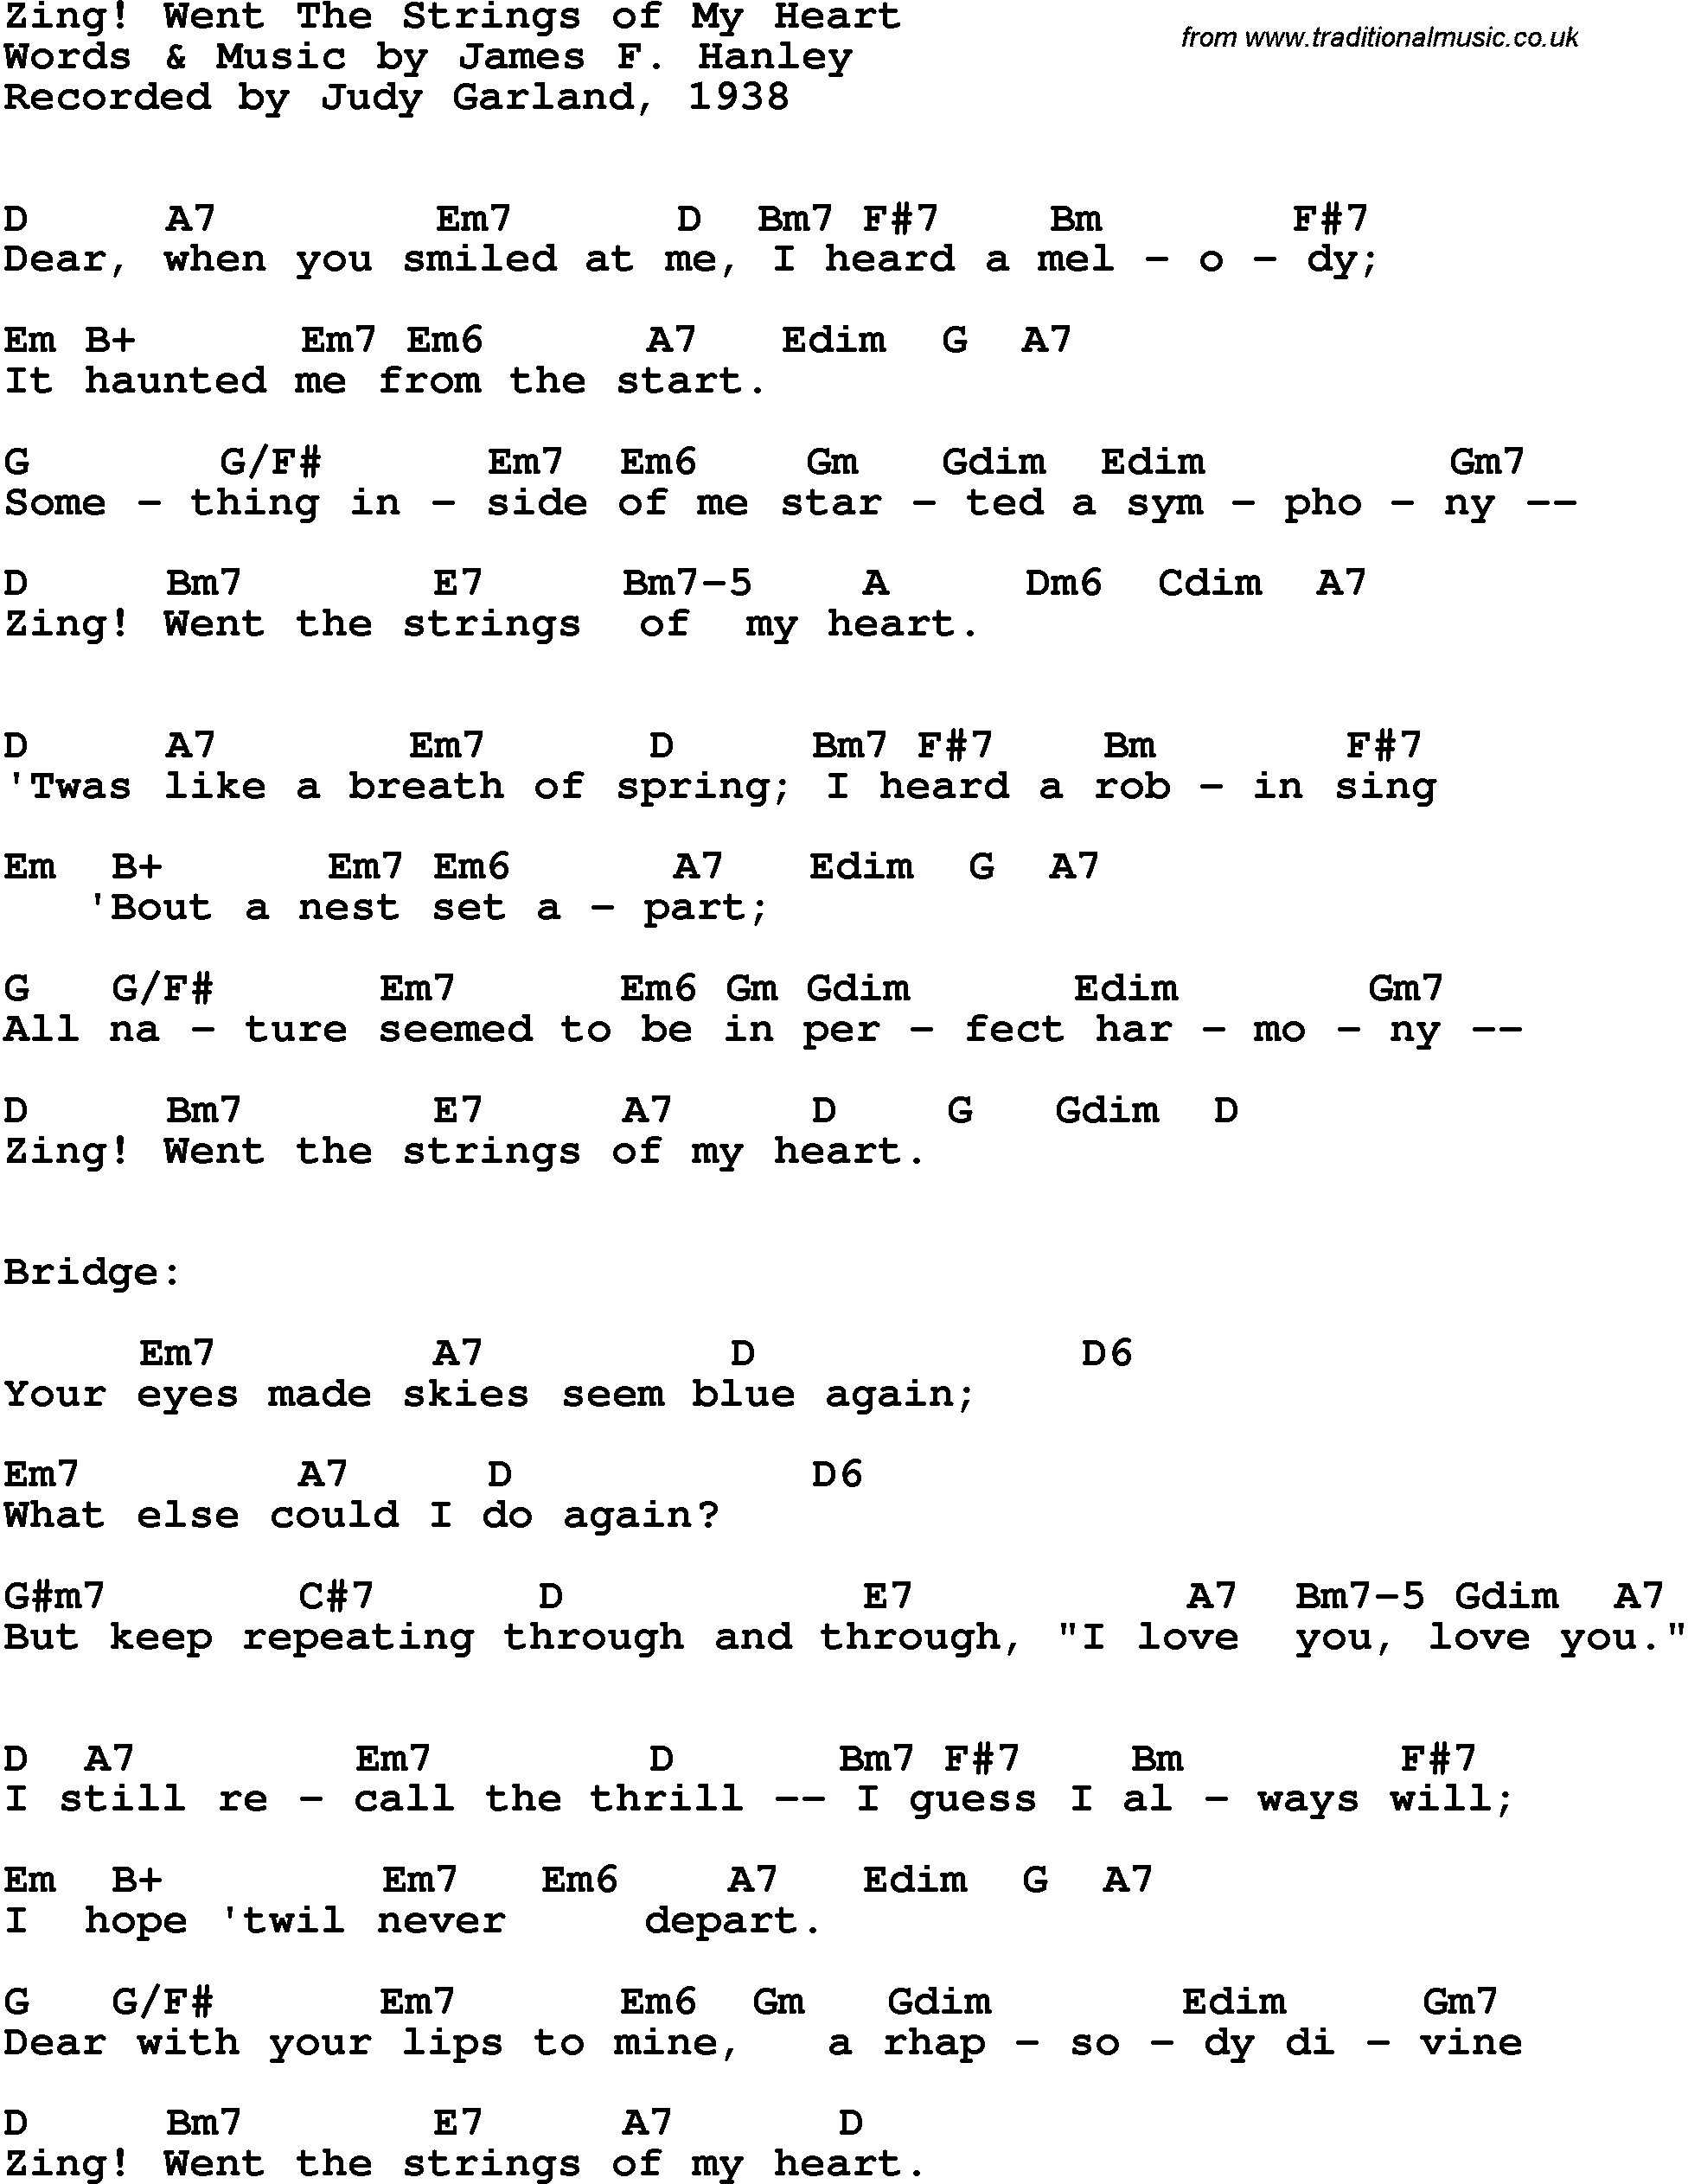 Song Lyrics with guitar chords for Zing! Went The Strings Of My Heart - Judy Garland, 1938